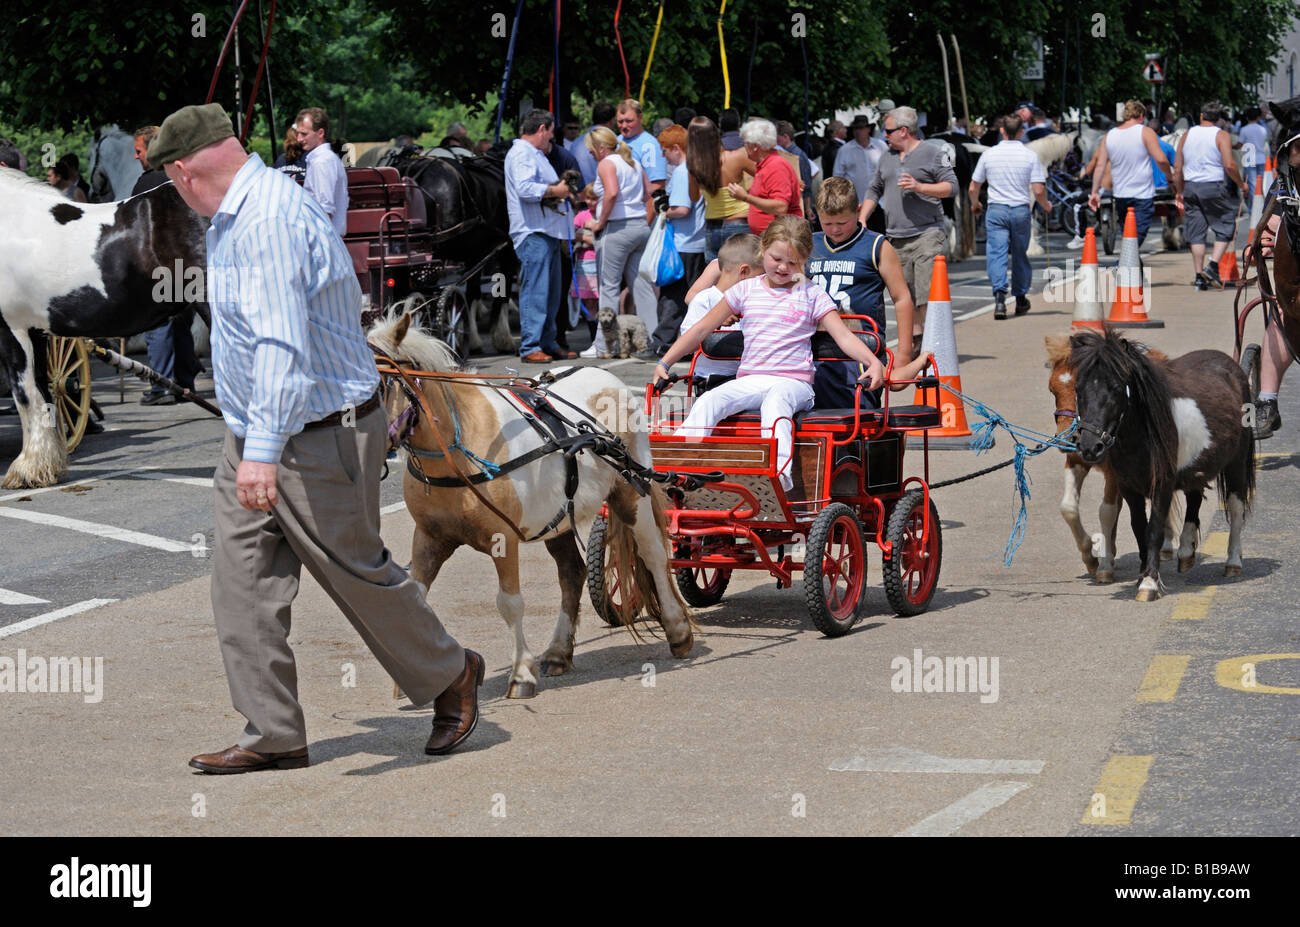 Miniature ponies and cart at Appleby Horse Fair. Appleby-in-Westmorland, Cumbria, England, United Kingdom, Europe. Stock Photo